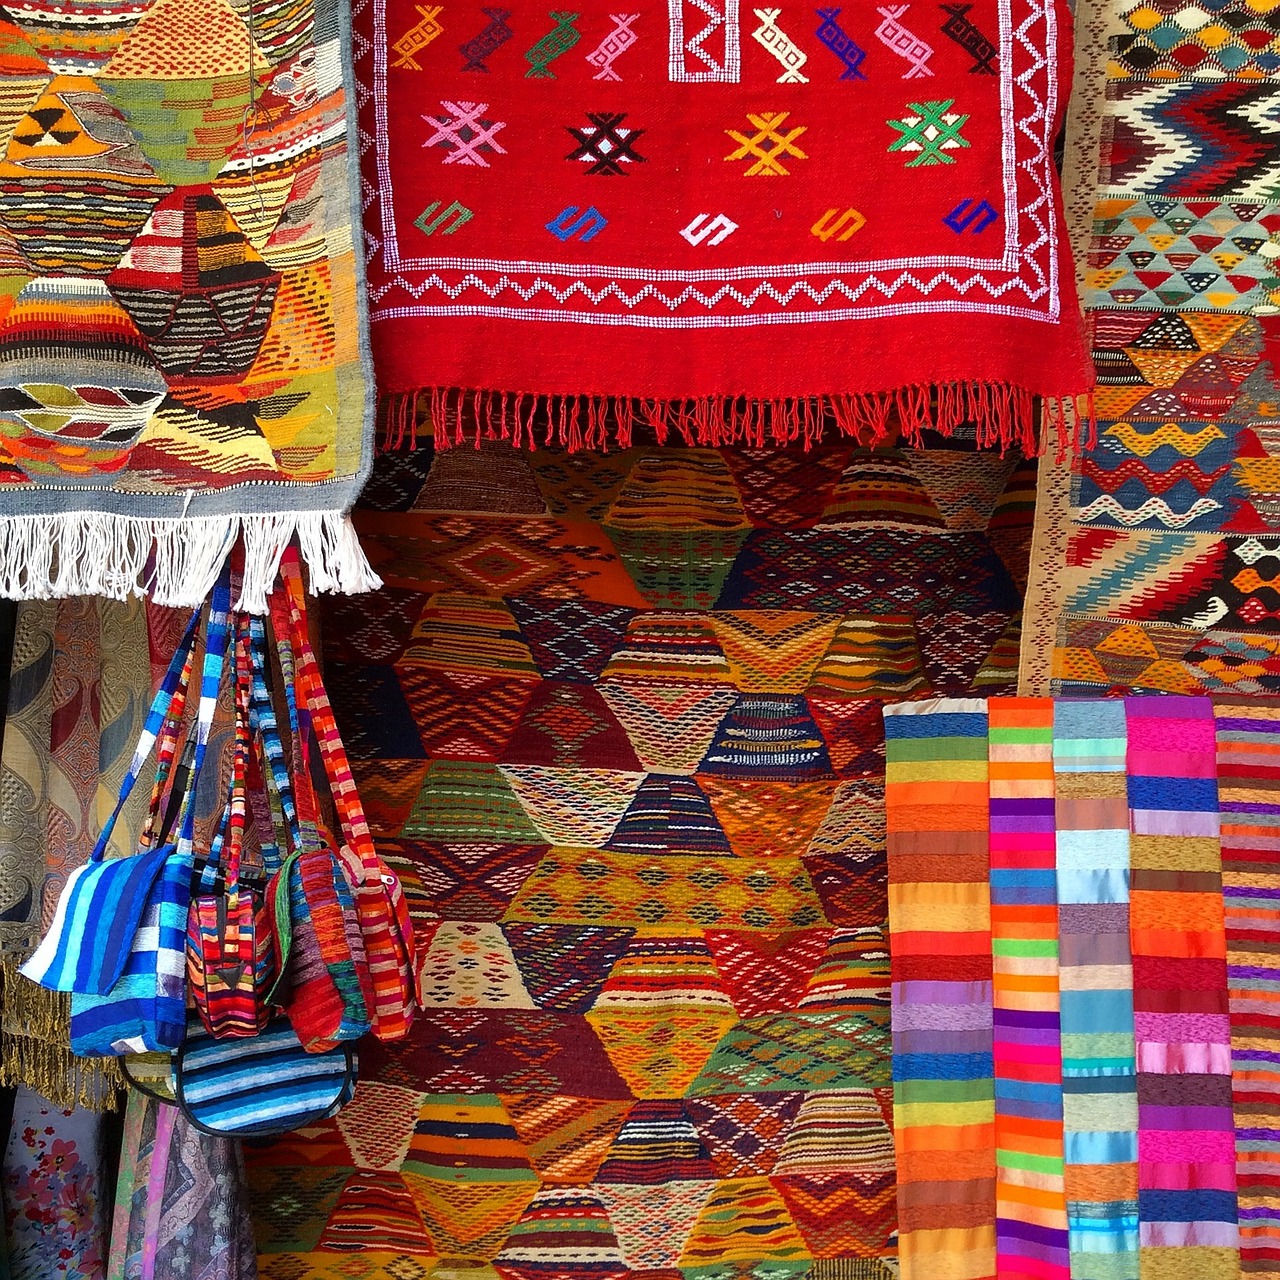 Things to buy in Morocco